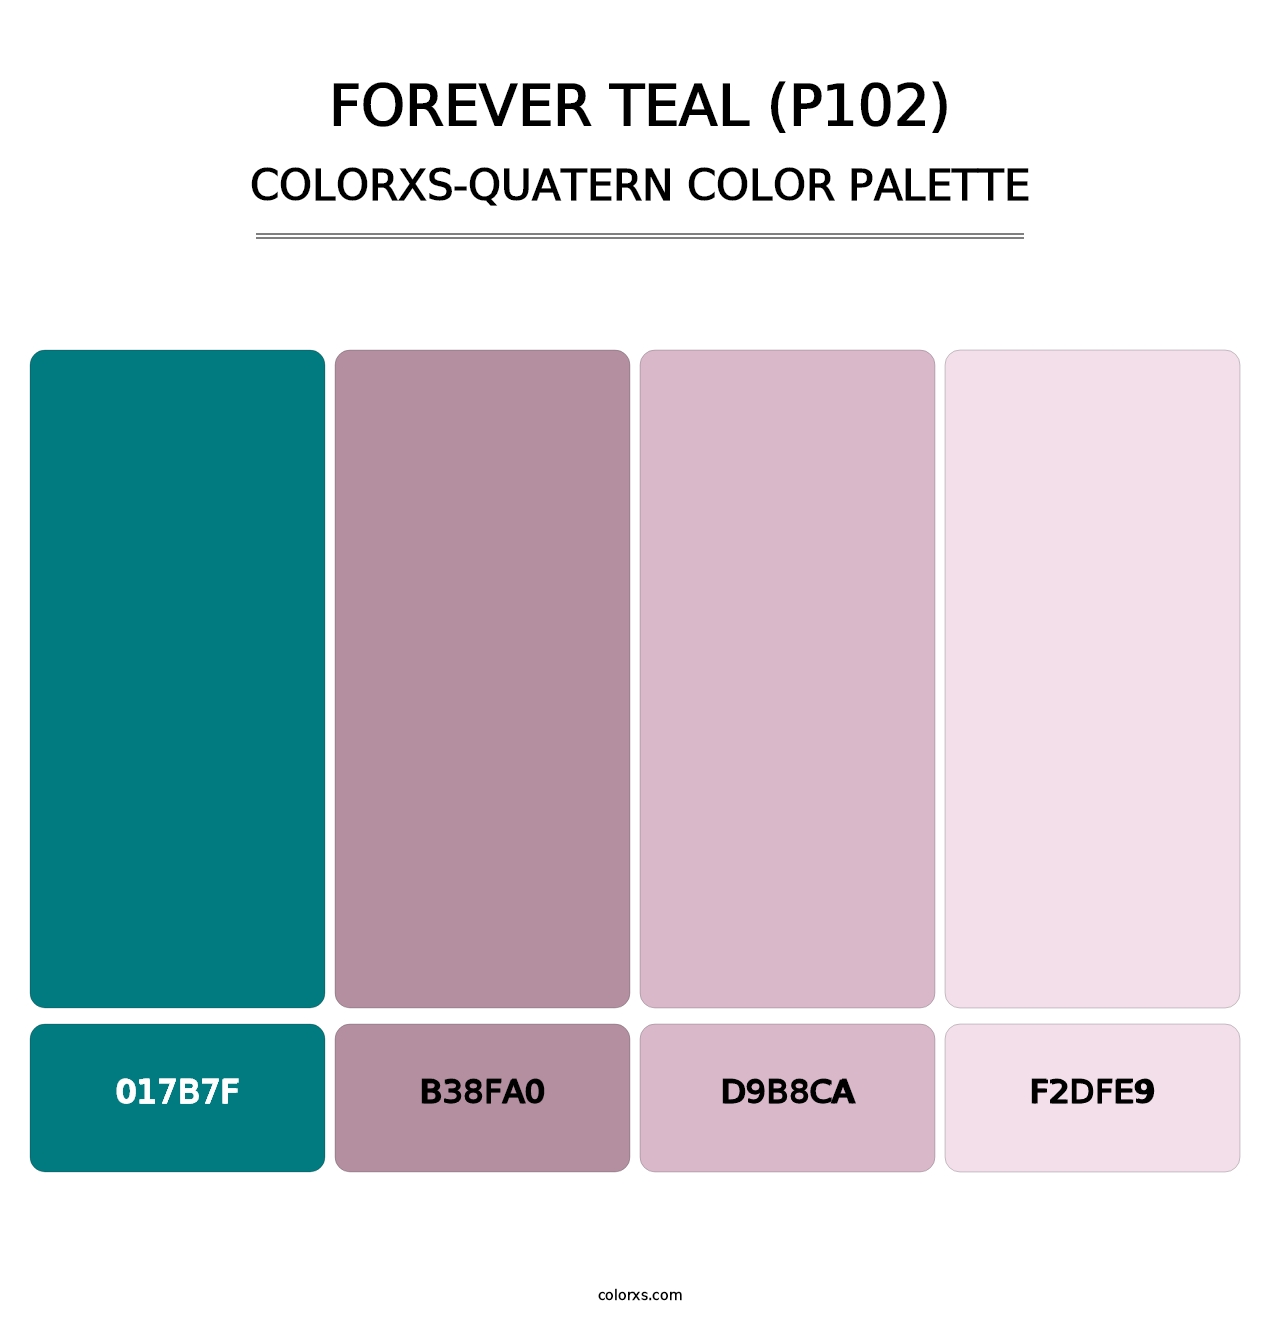 Forever Teal (P102) - Colorxs Quatern Palette